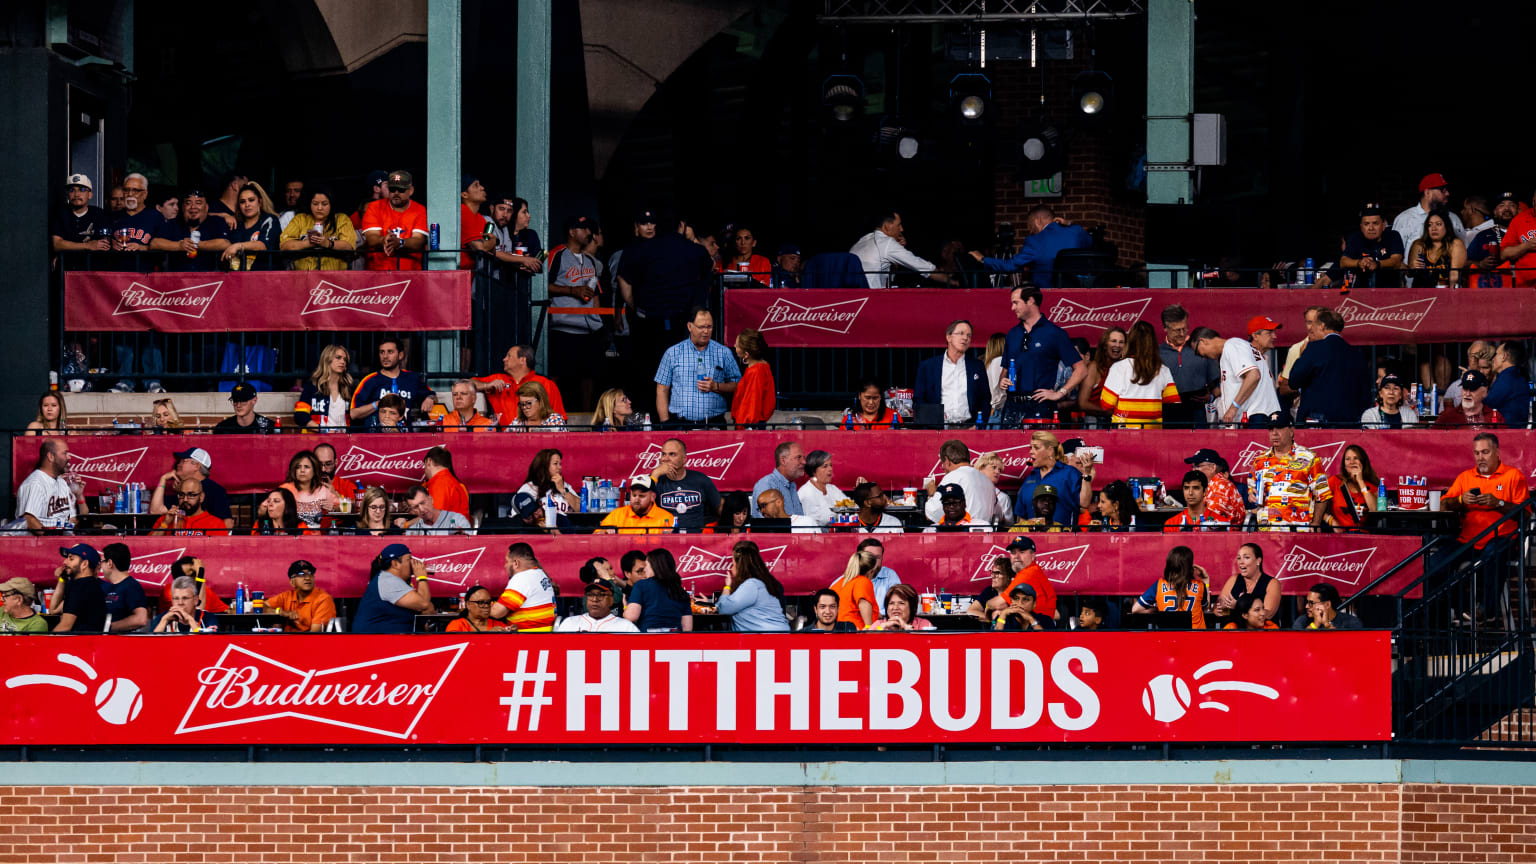 Houston Astros offer up Minute Maid Park stadium seats to lucky fans -  CultureMap Houston